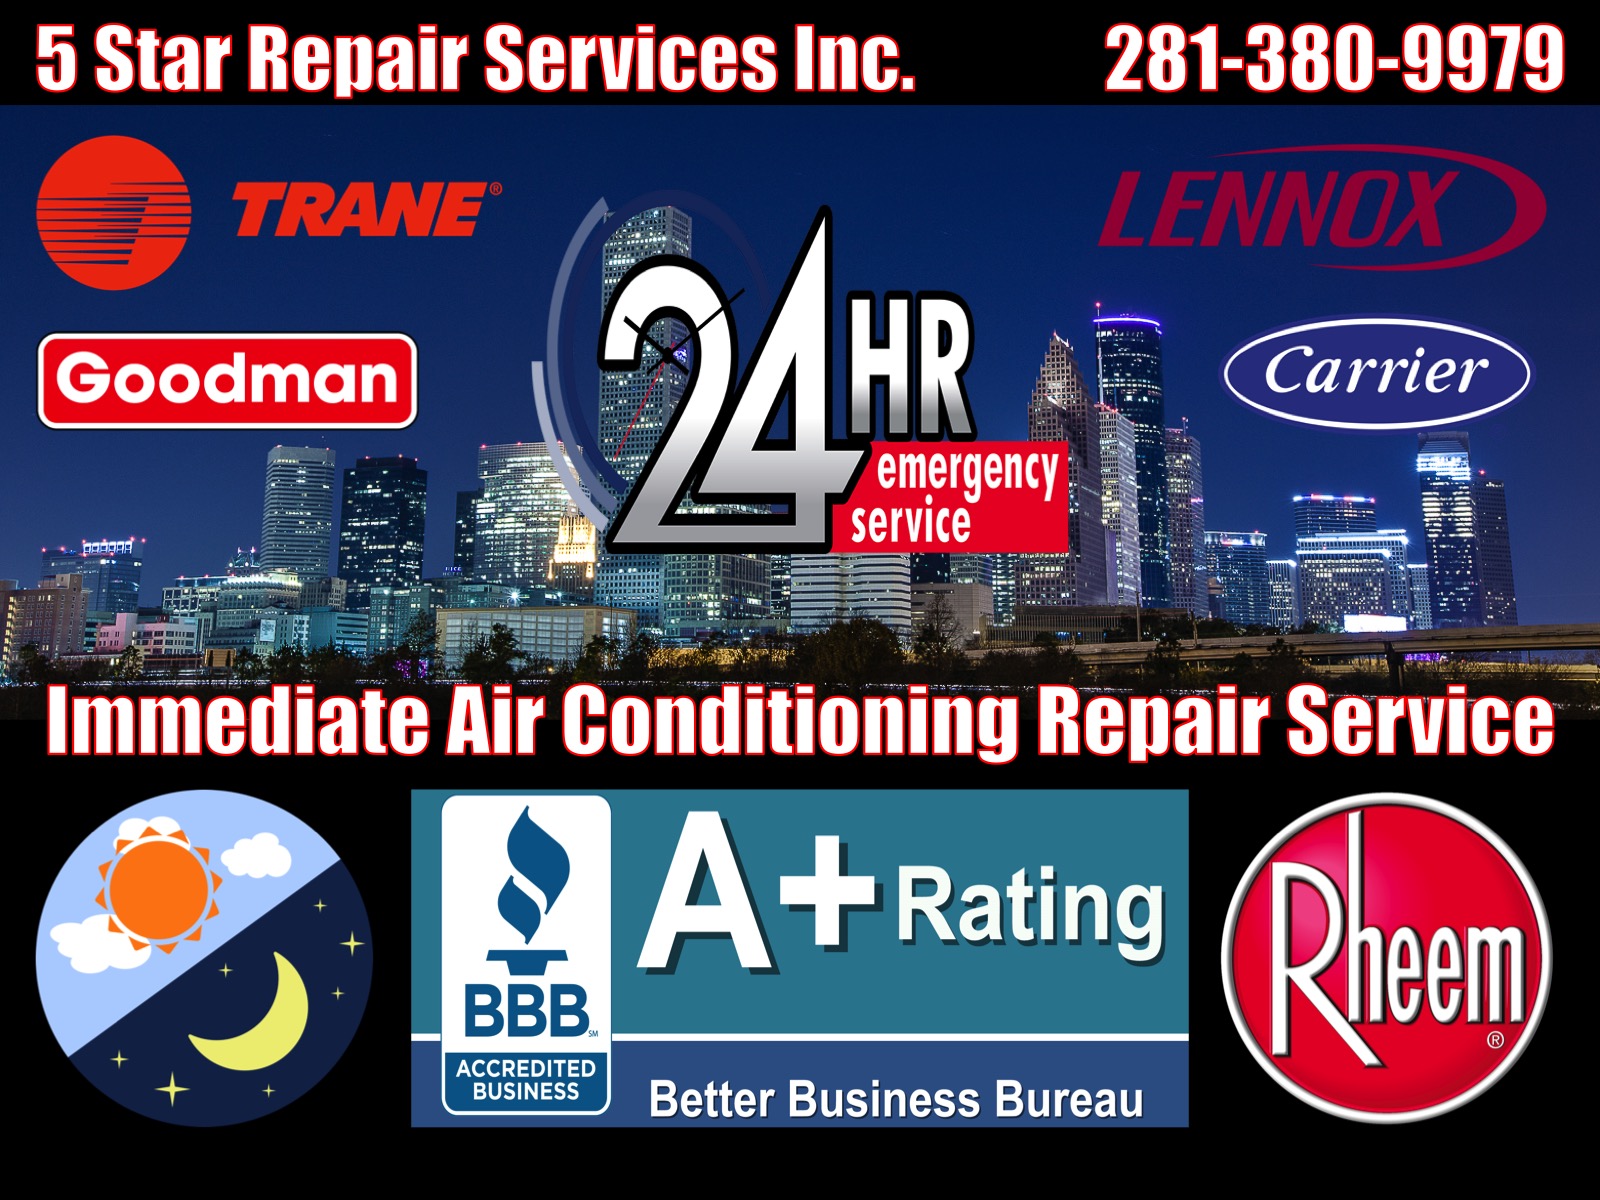 24 Hour Emergency Air Conditioning AC HVAC Furnace Condition Repair Service Spring 77382 77380 77379 77373 77383 77386 77388 77389 77391 77393 Central Cooling Unit System Duct Cleaning Maintenance